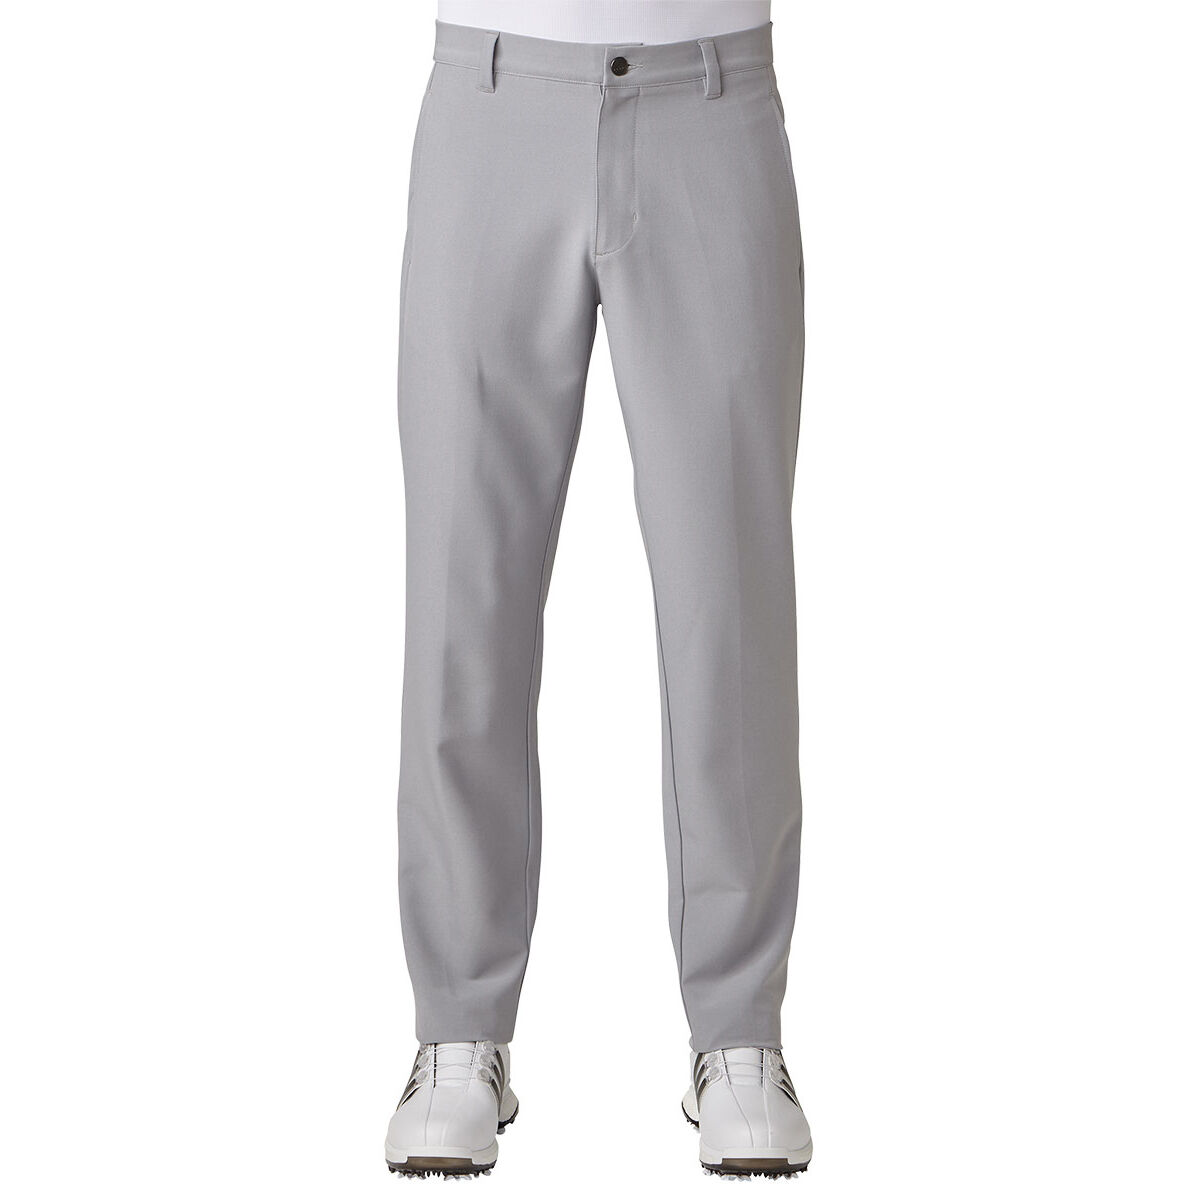 adidas ultimate 3 stripe trousers